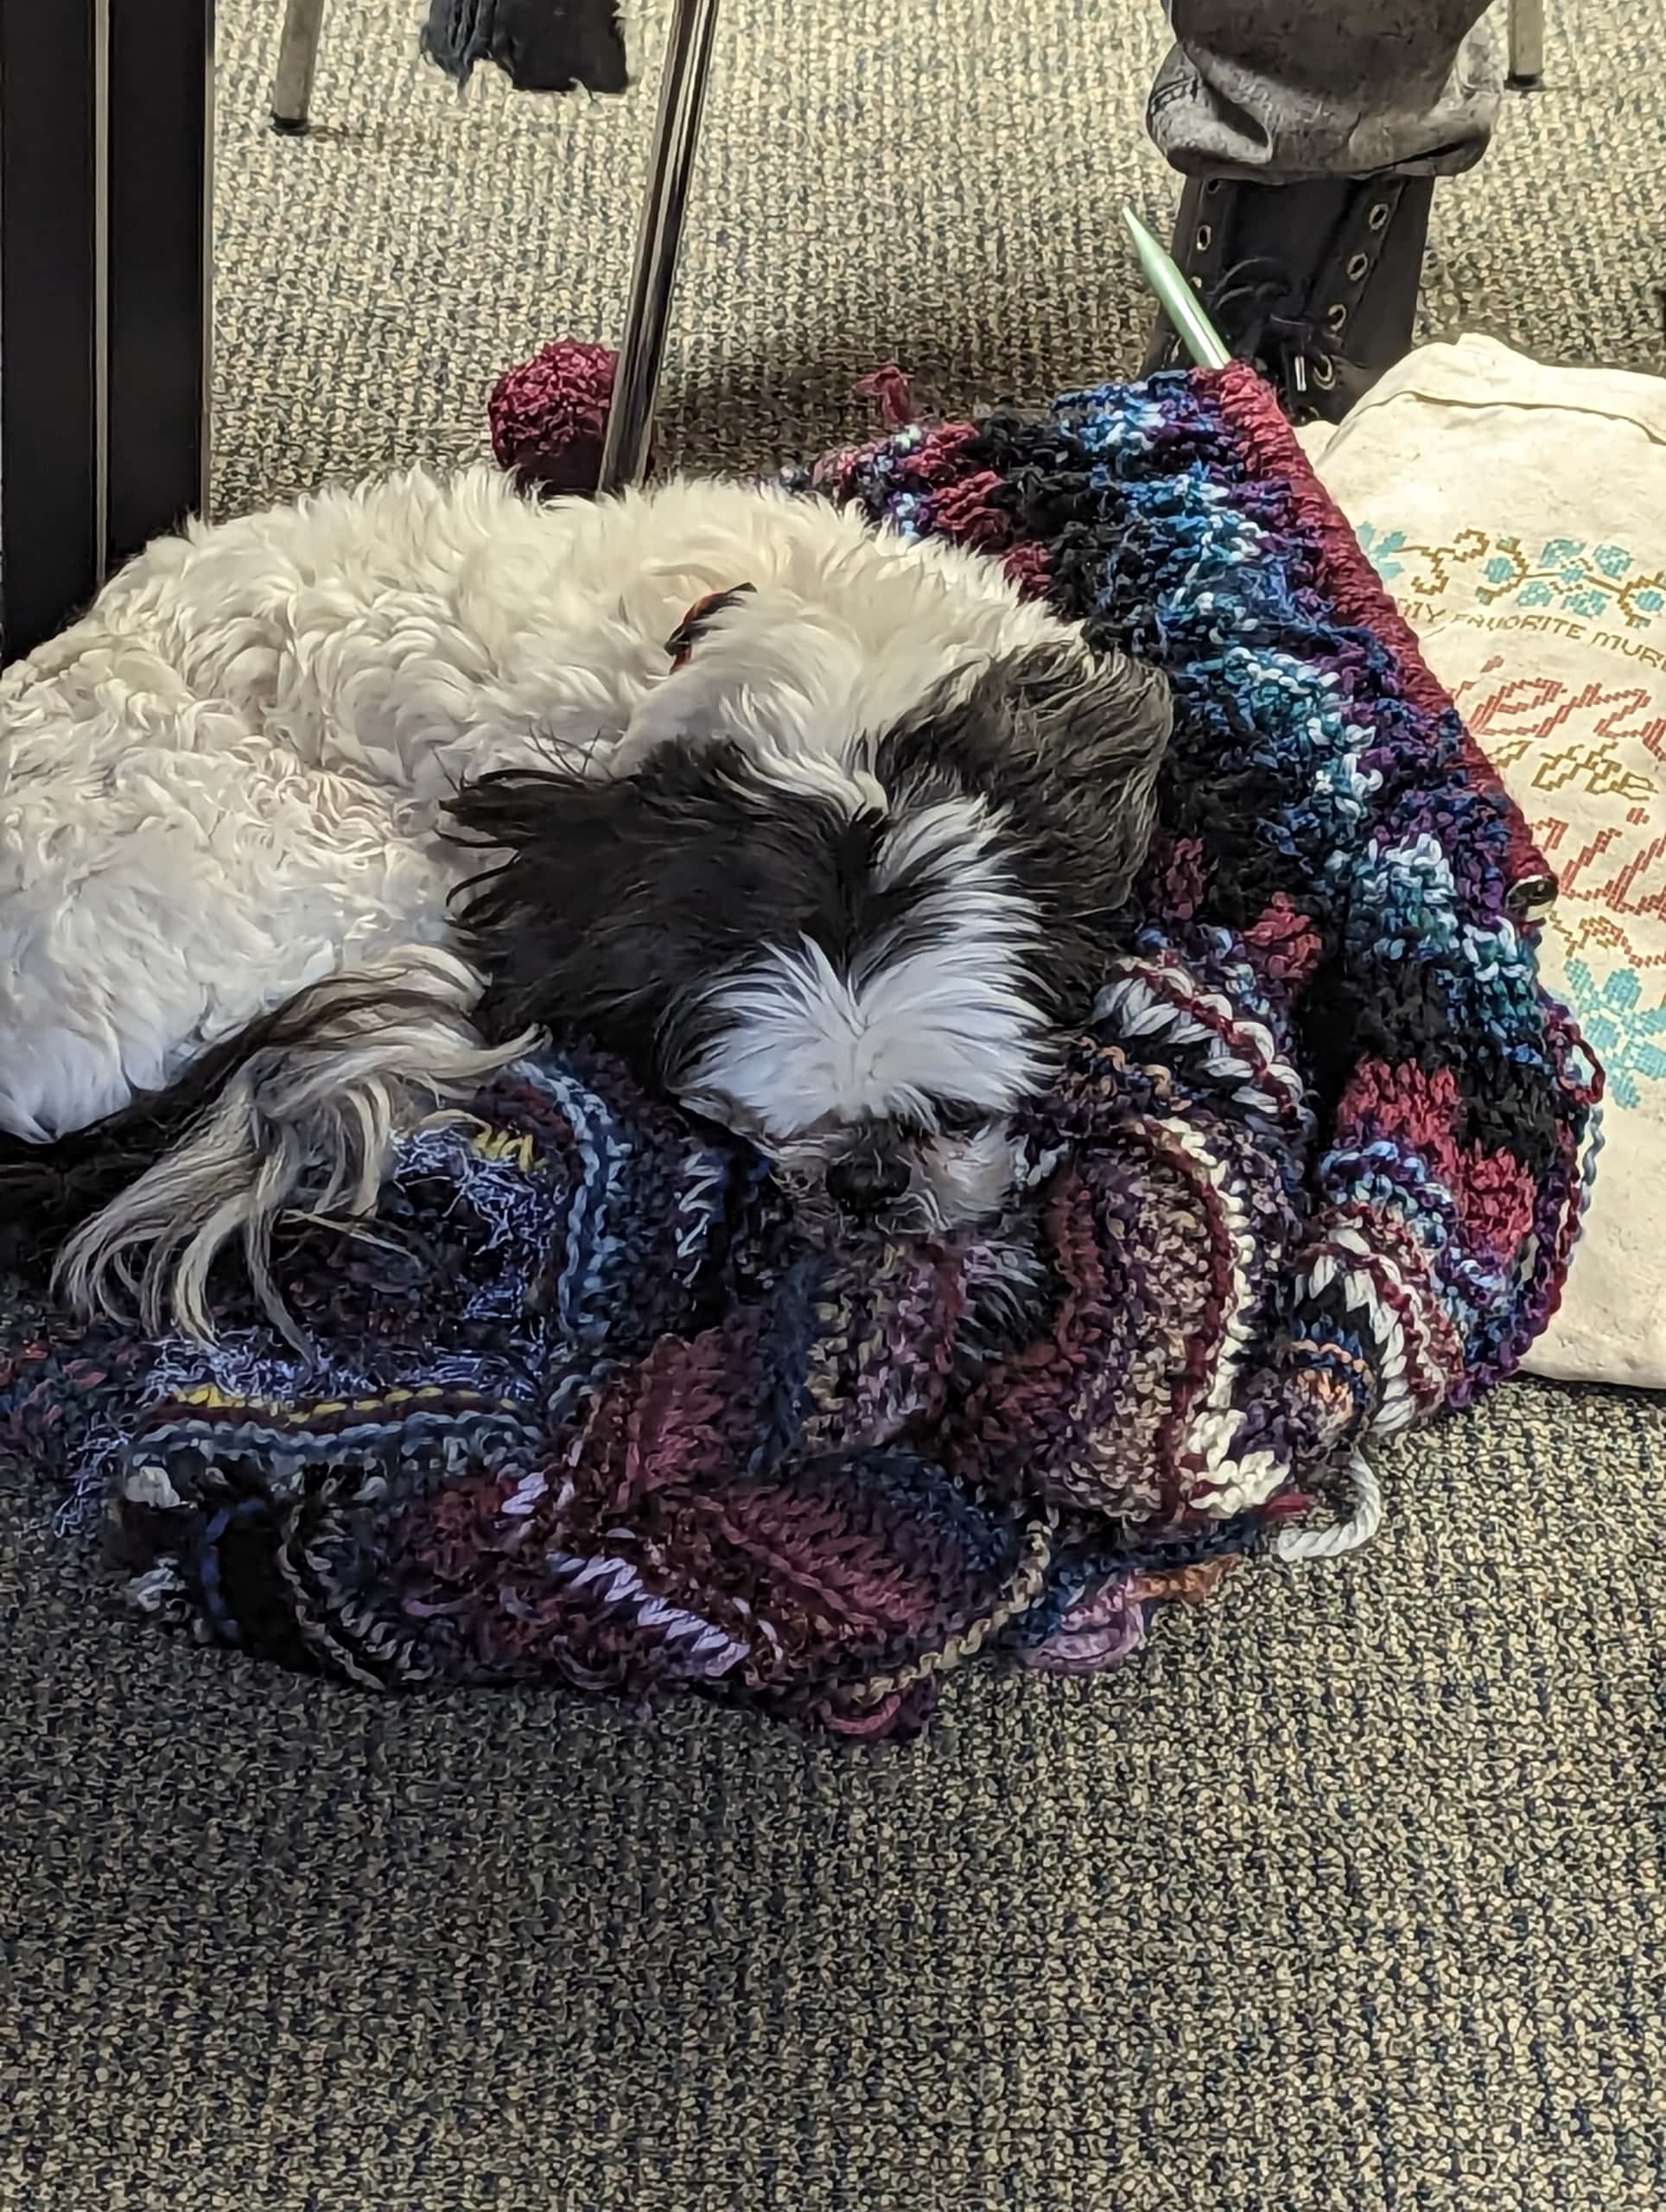 Bandit, a black and white dog curls up in a knitting project from Journey: Healing Together's Crafternoon